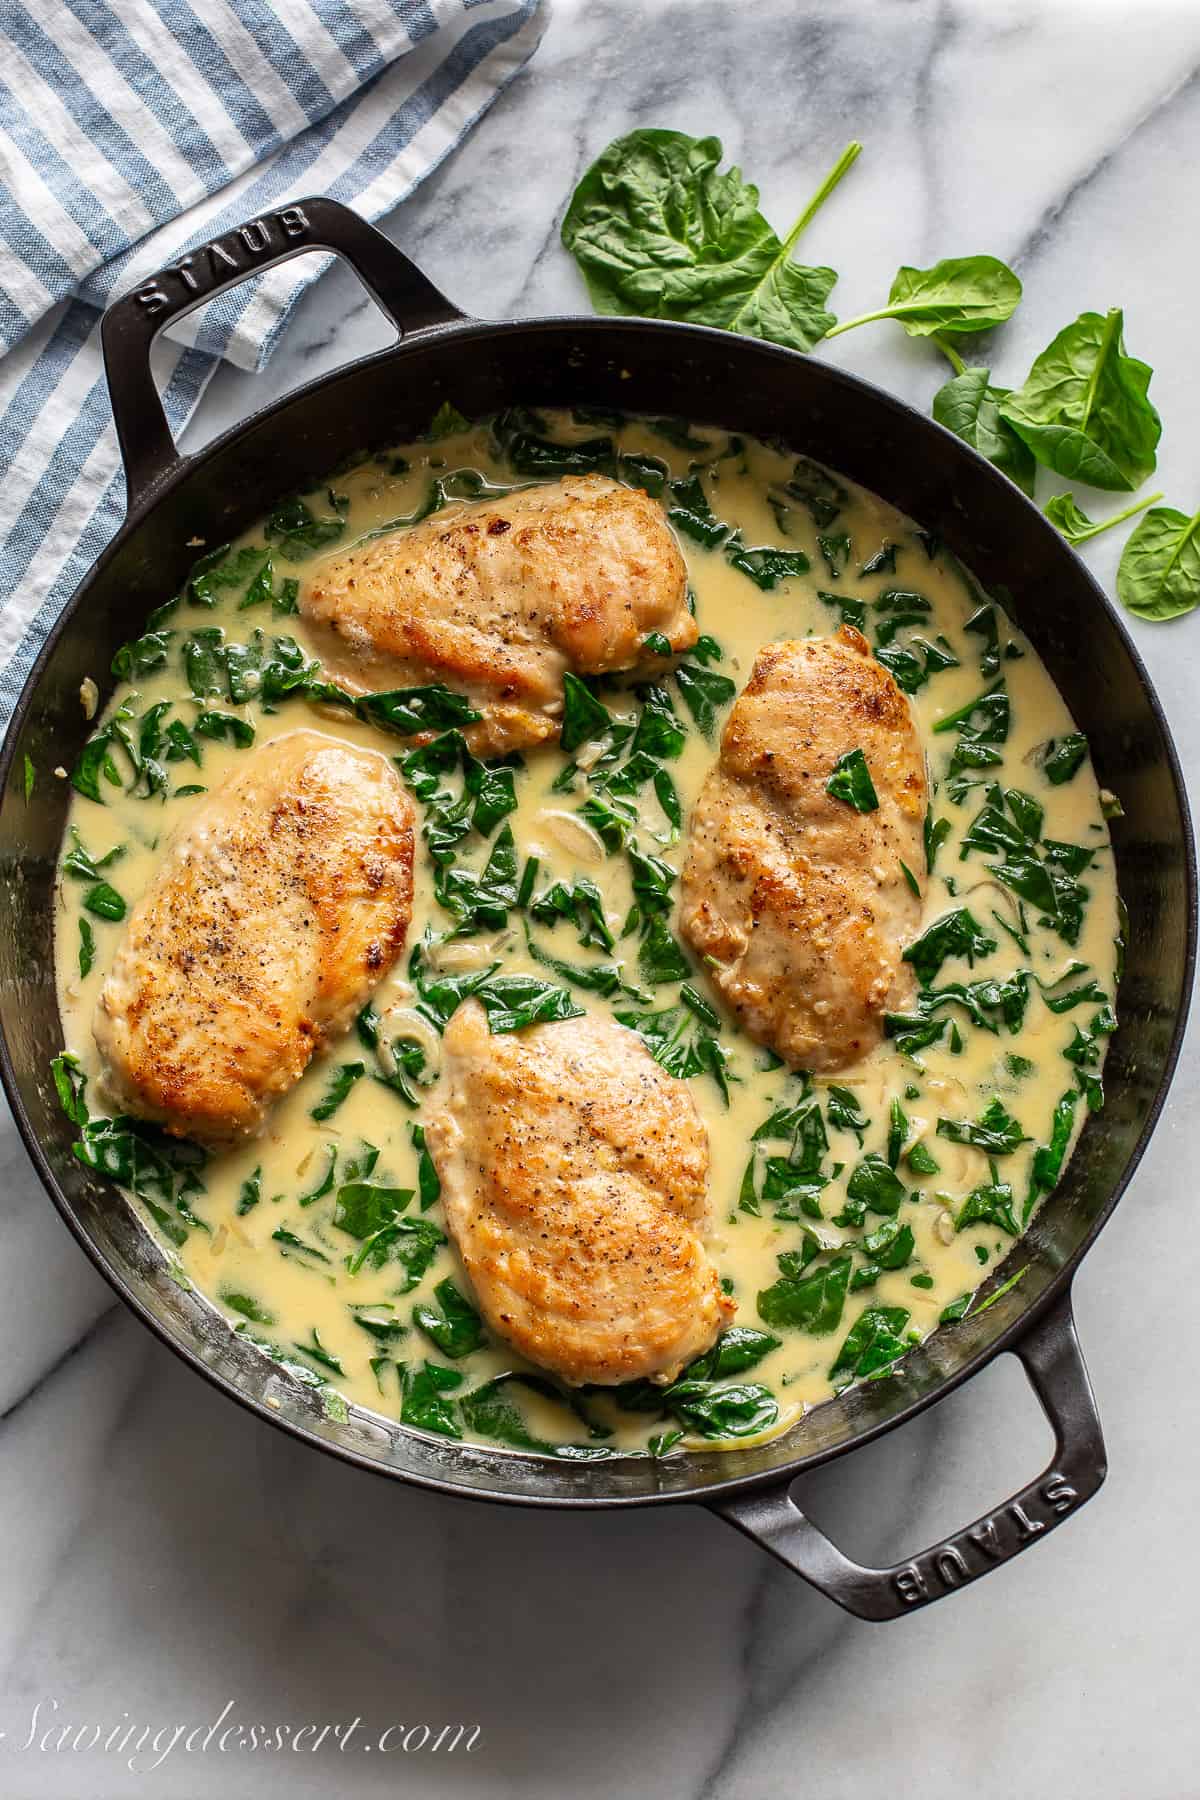 A skillet filled with chicken breasts in a spinach cream sauce